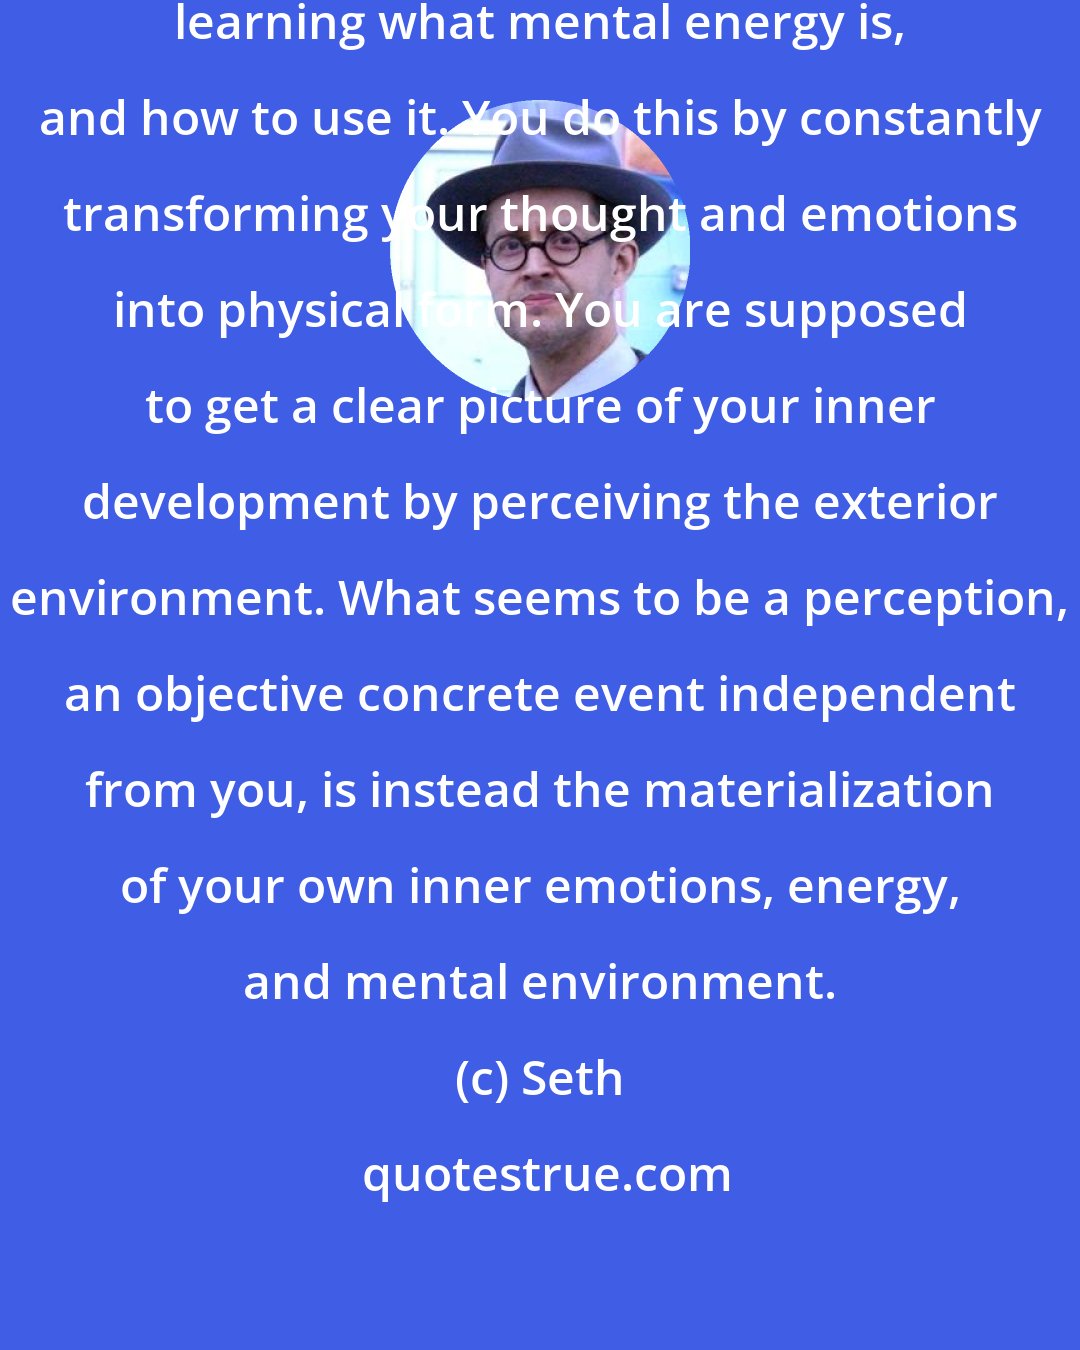 Seth: In your system of reality you are learning what mental energy is, and how to use it. You do this by constantly transforming your thought and emotions into physical form. You are supposed to get a clear picture of your inner development by perceiving the exterior environment. What seems to be a perception, an objective concrete event independent from you, is instead the materialization of your own inner emotions, energy, and mental environment.